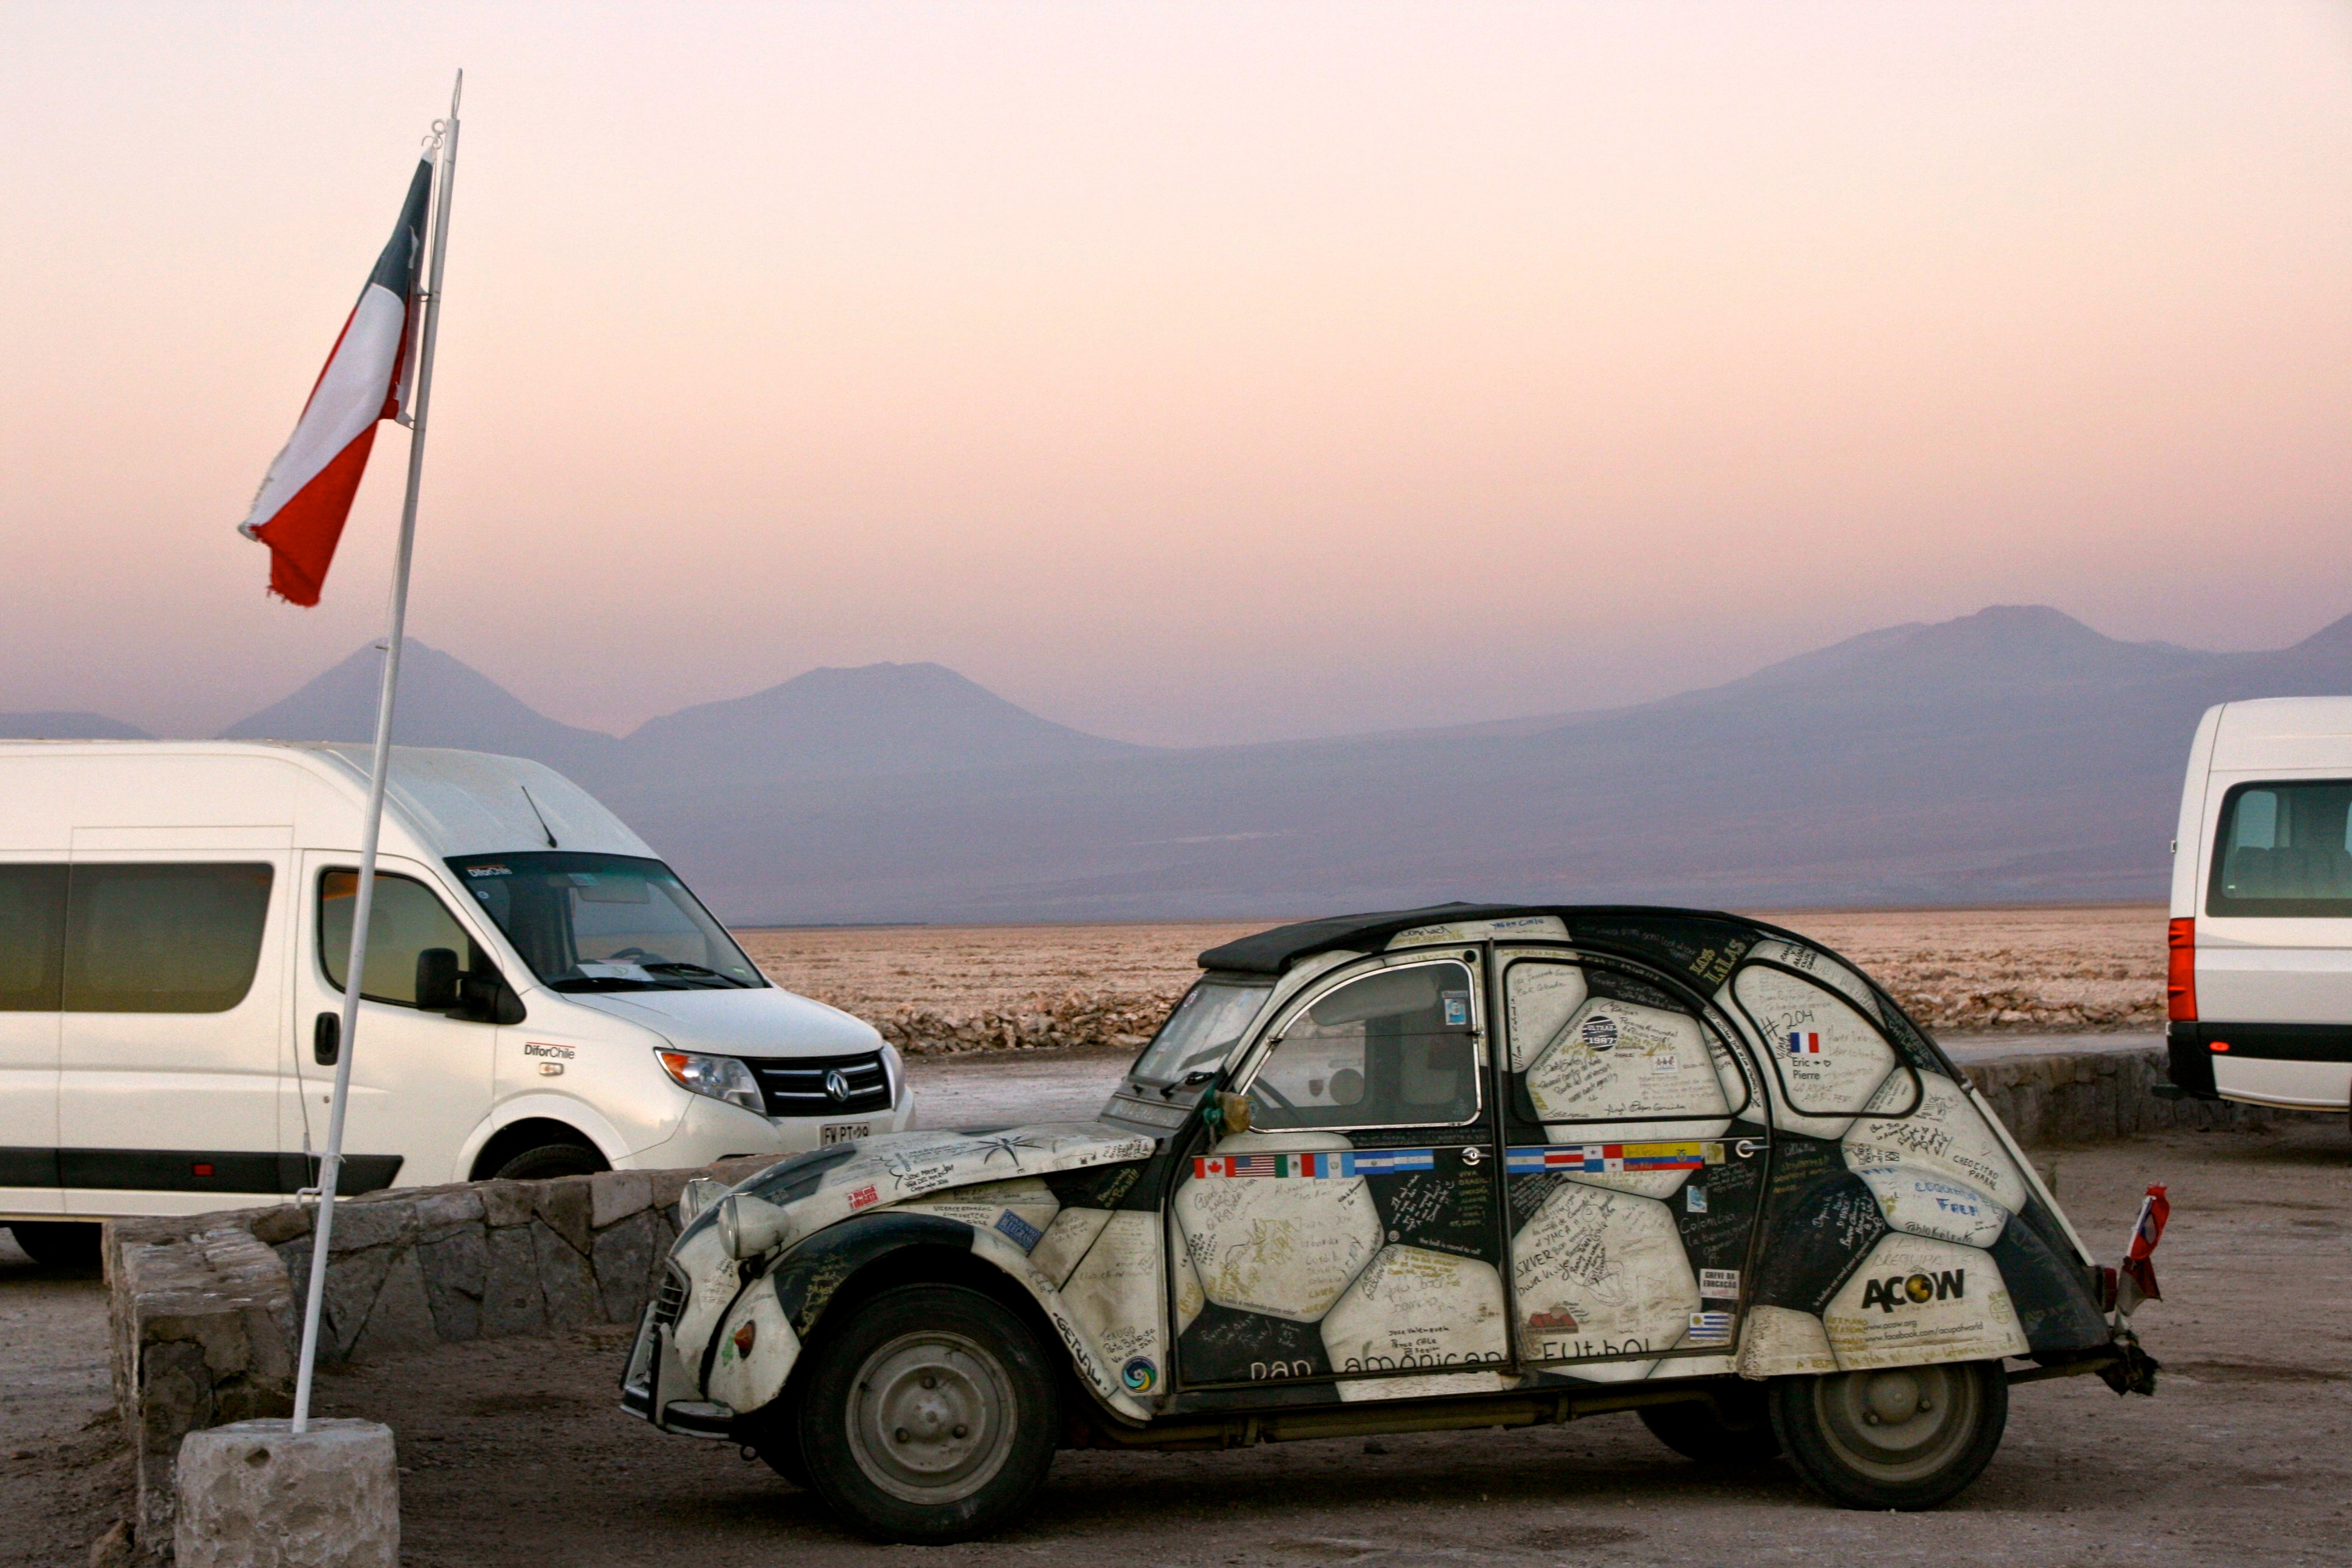 Some serious soccer fans used this ancient Volkswagen to drive across South America during the 2014 World Cup.